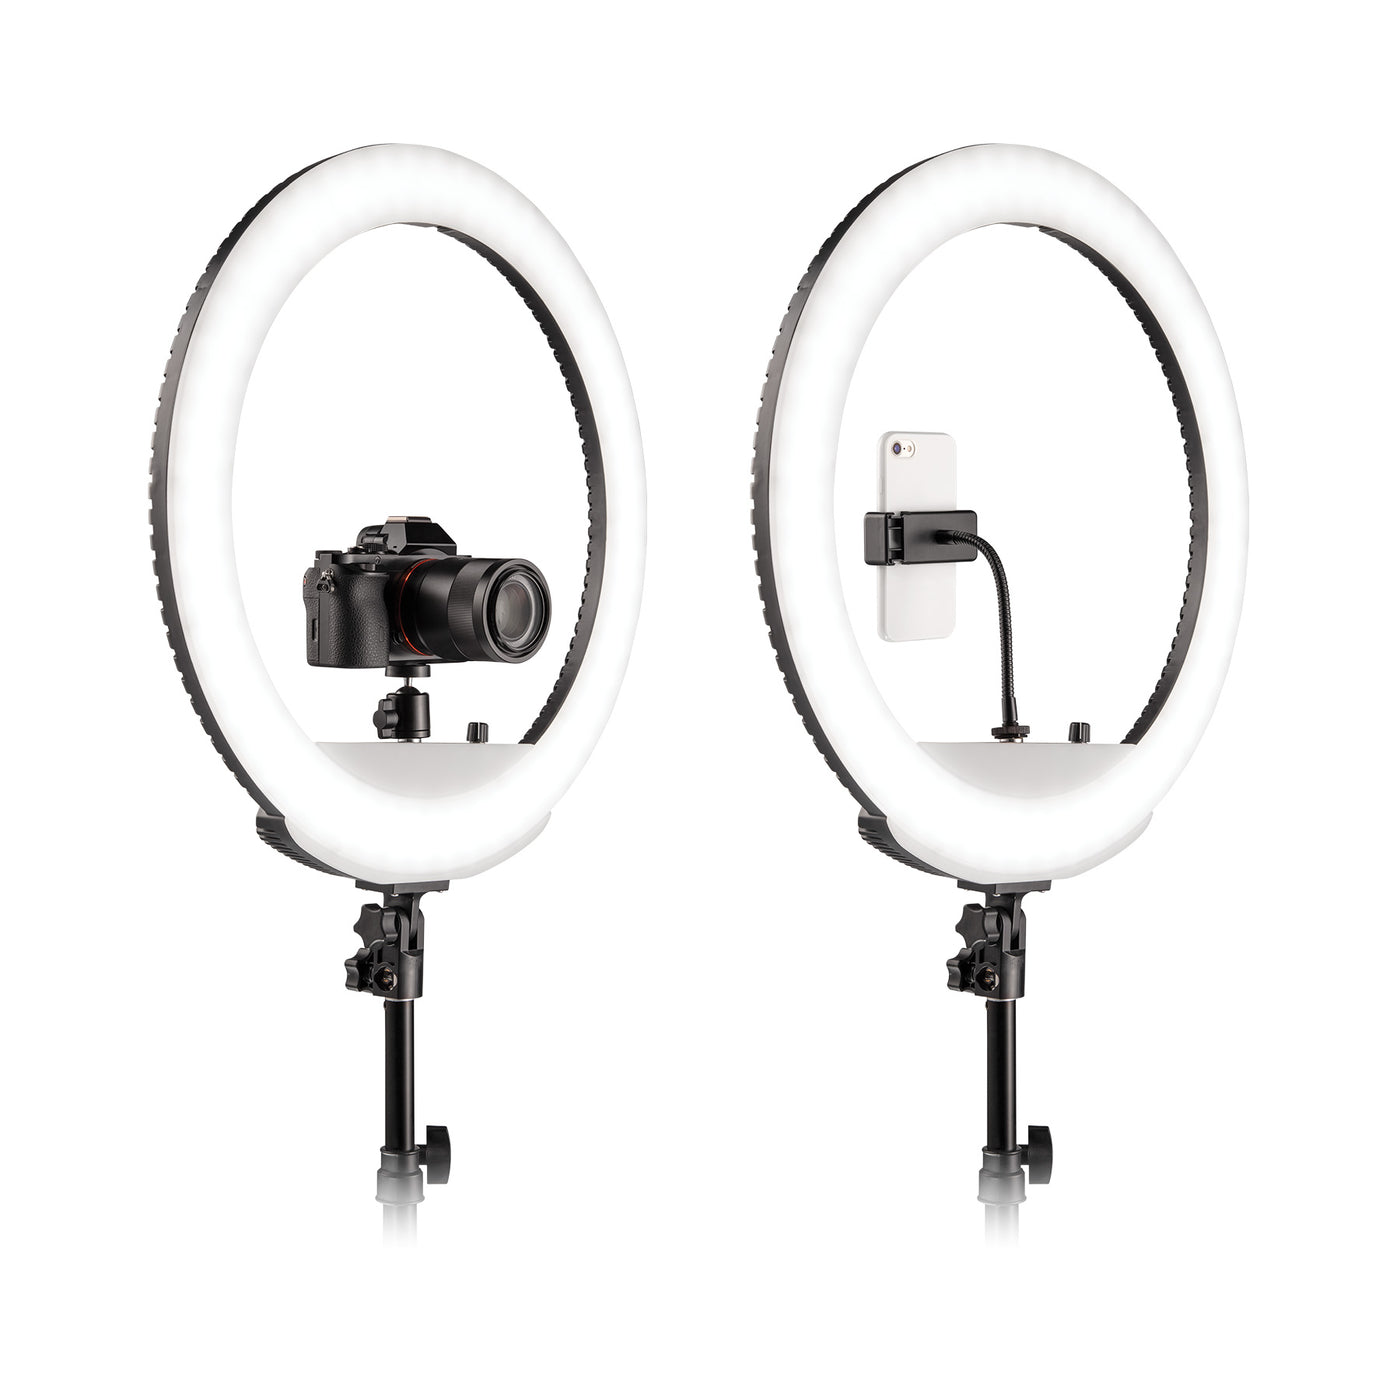 ring light showing dslr camera and phone mounted